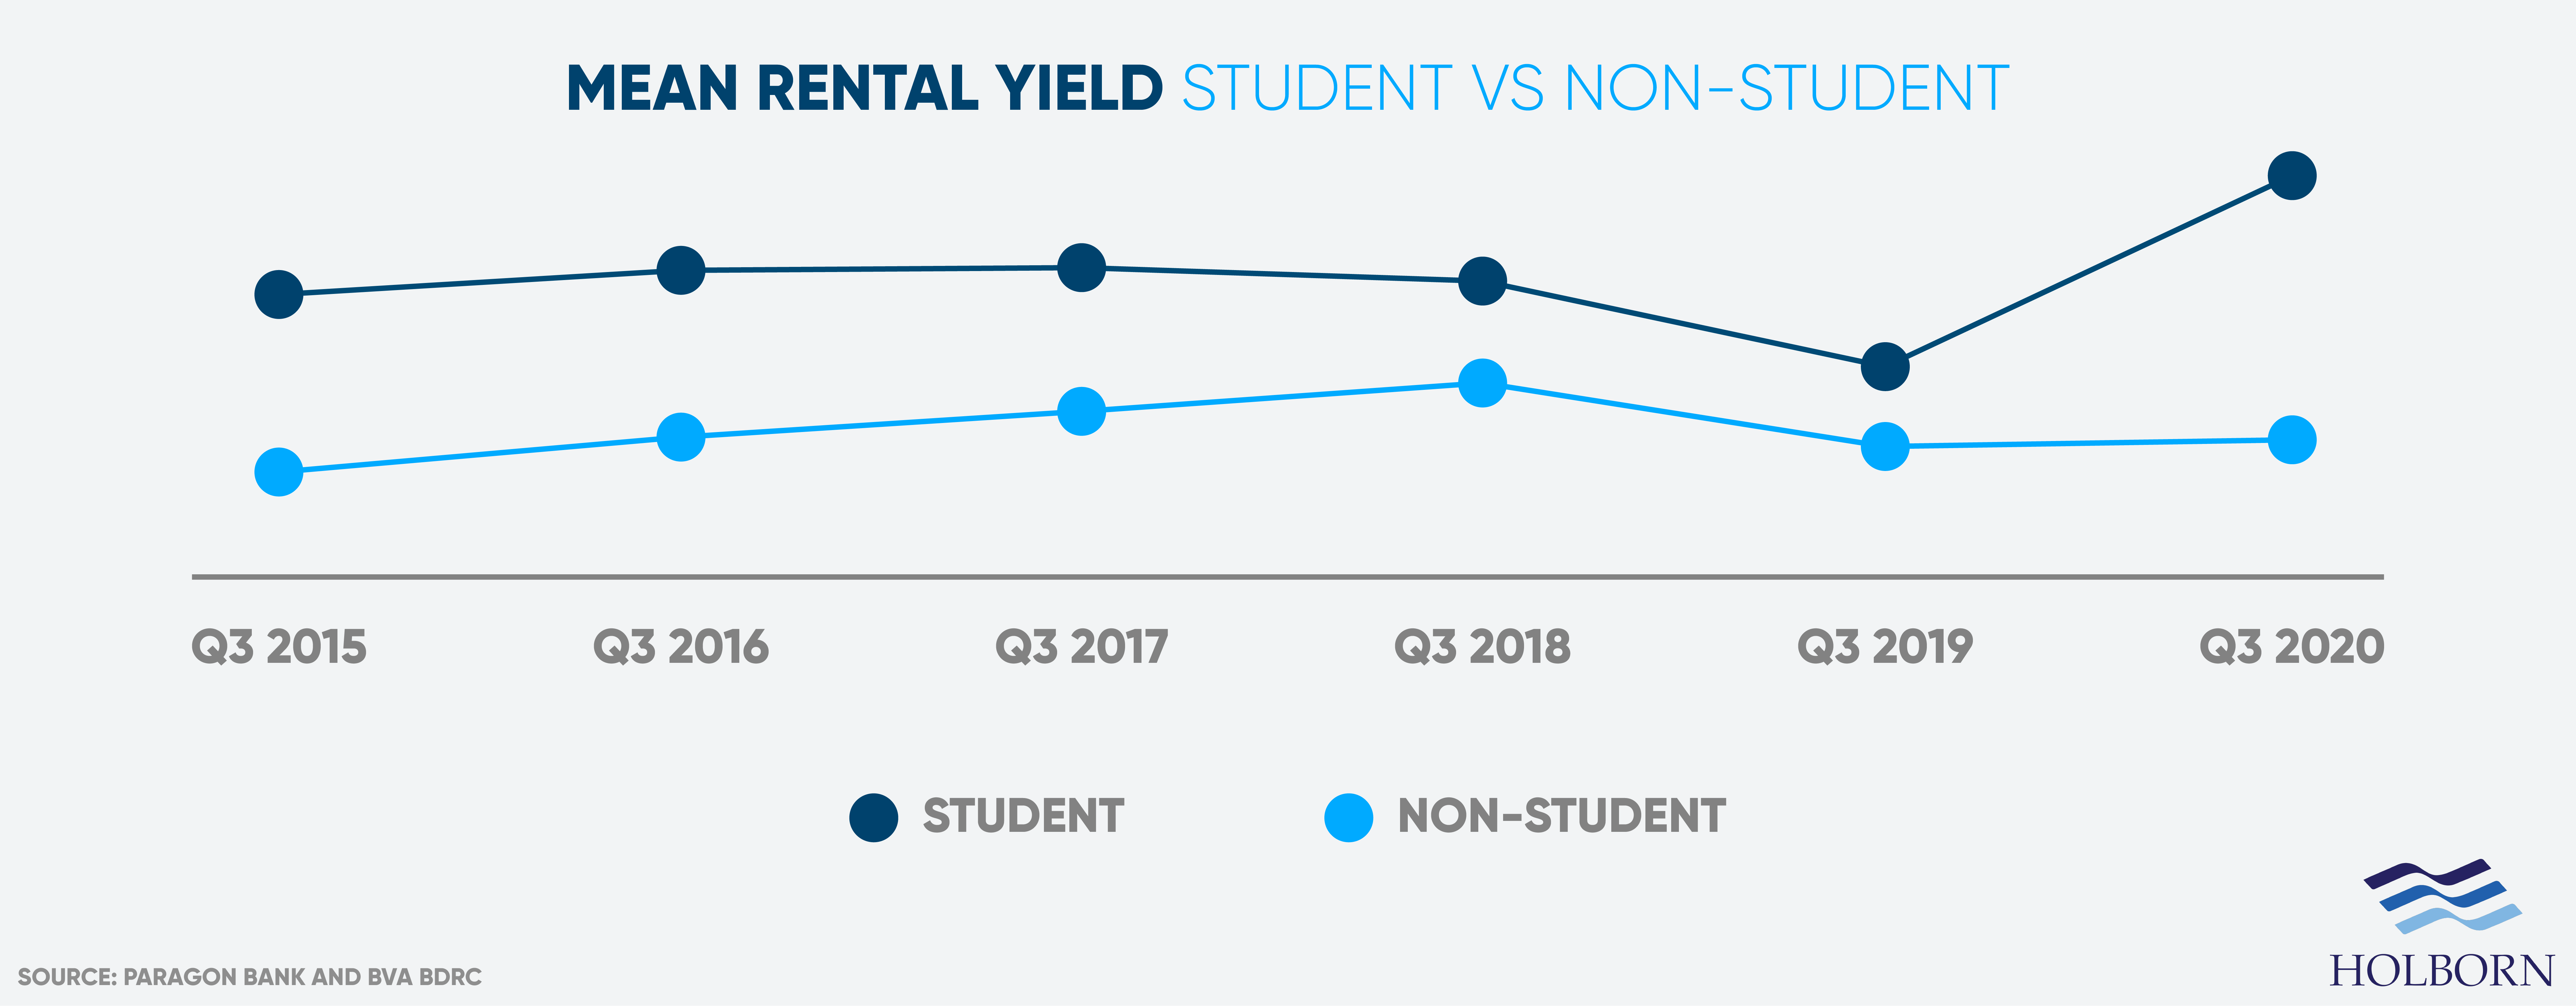 student housing outperformed non-student properties in terms of mean rental yield